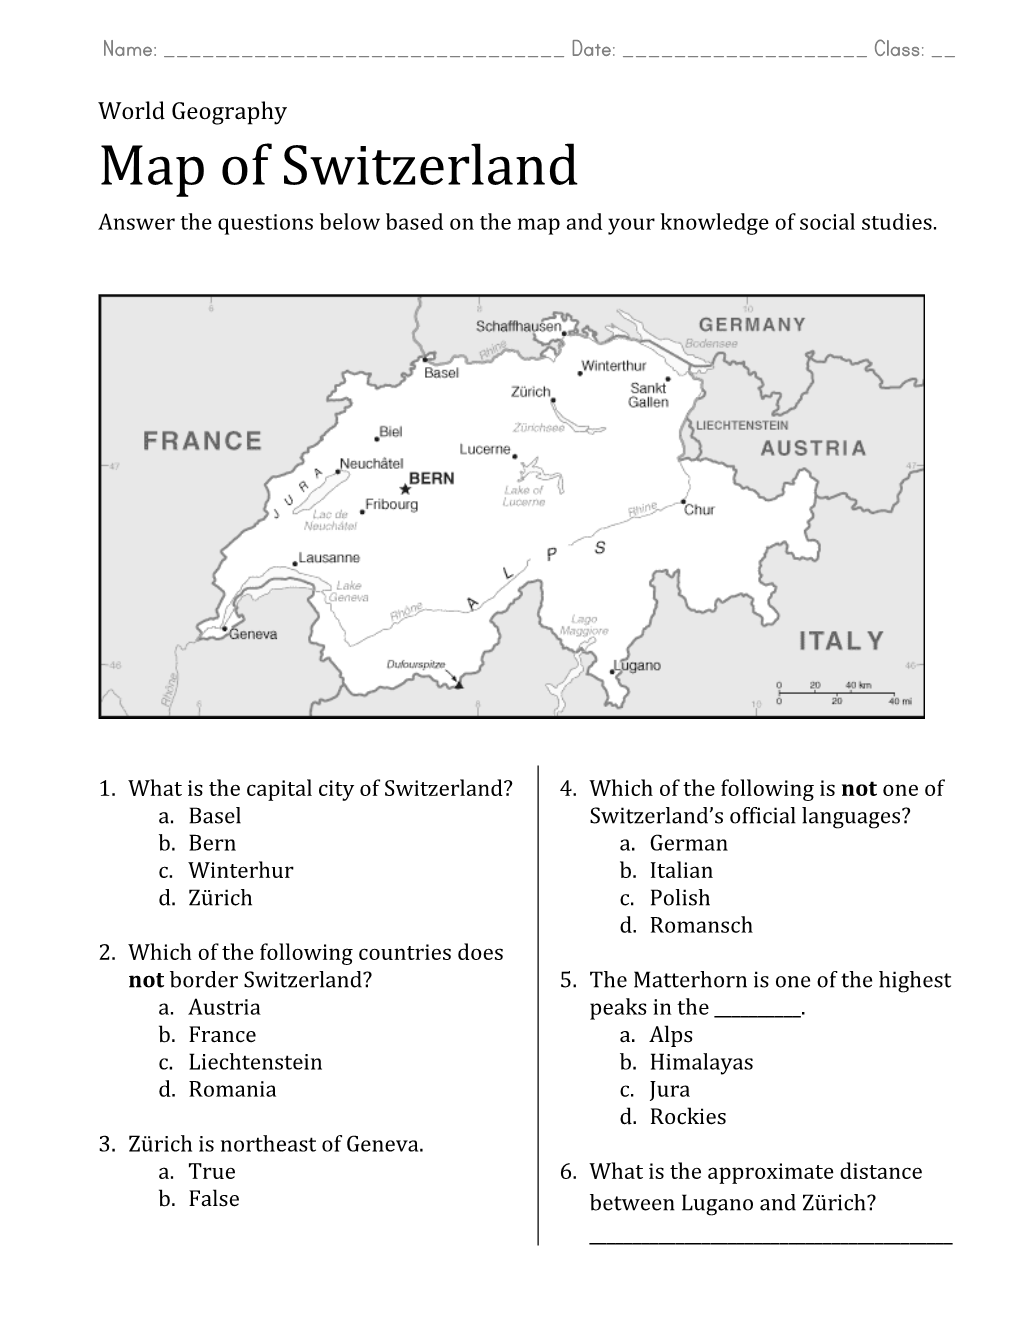 Map of Switzerland Answer the Questions Below Based on the Map and Your Knowledge of Social Studies